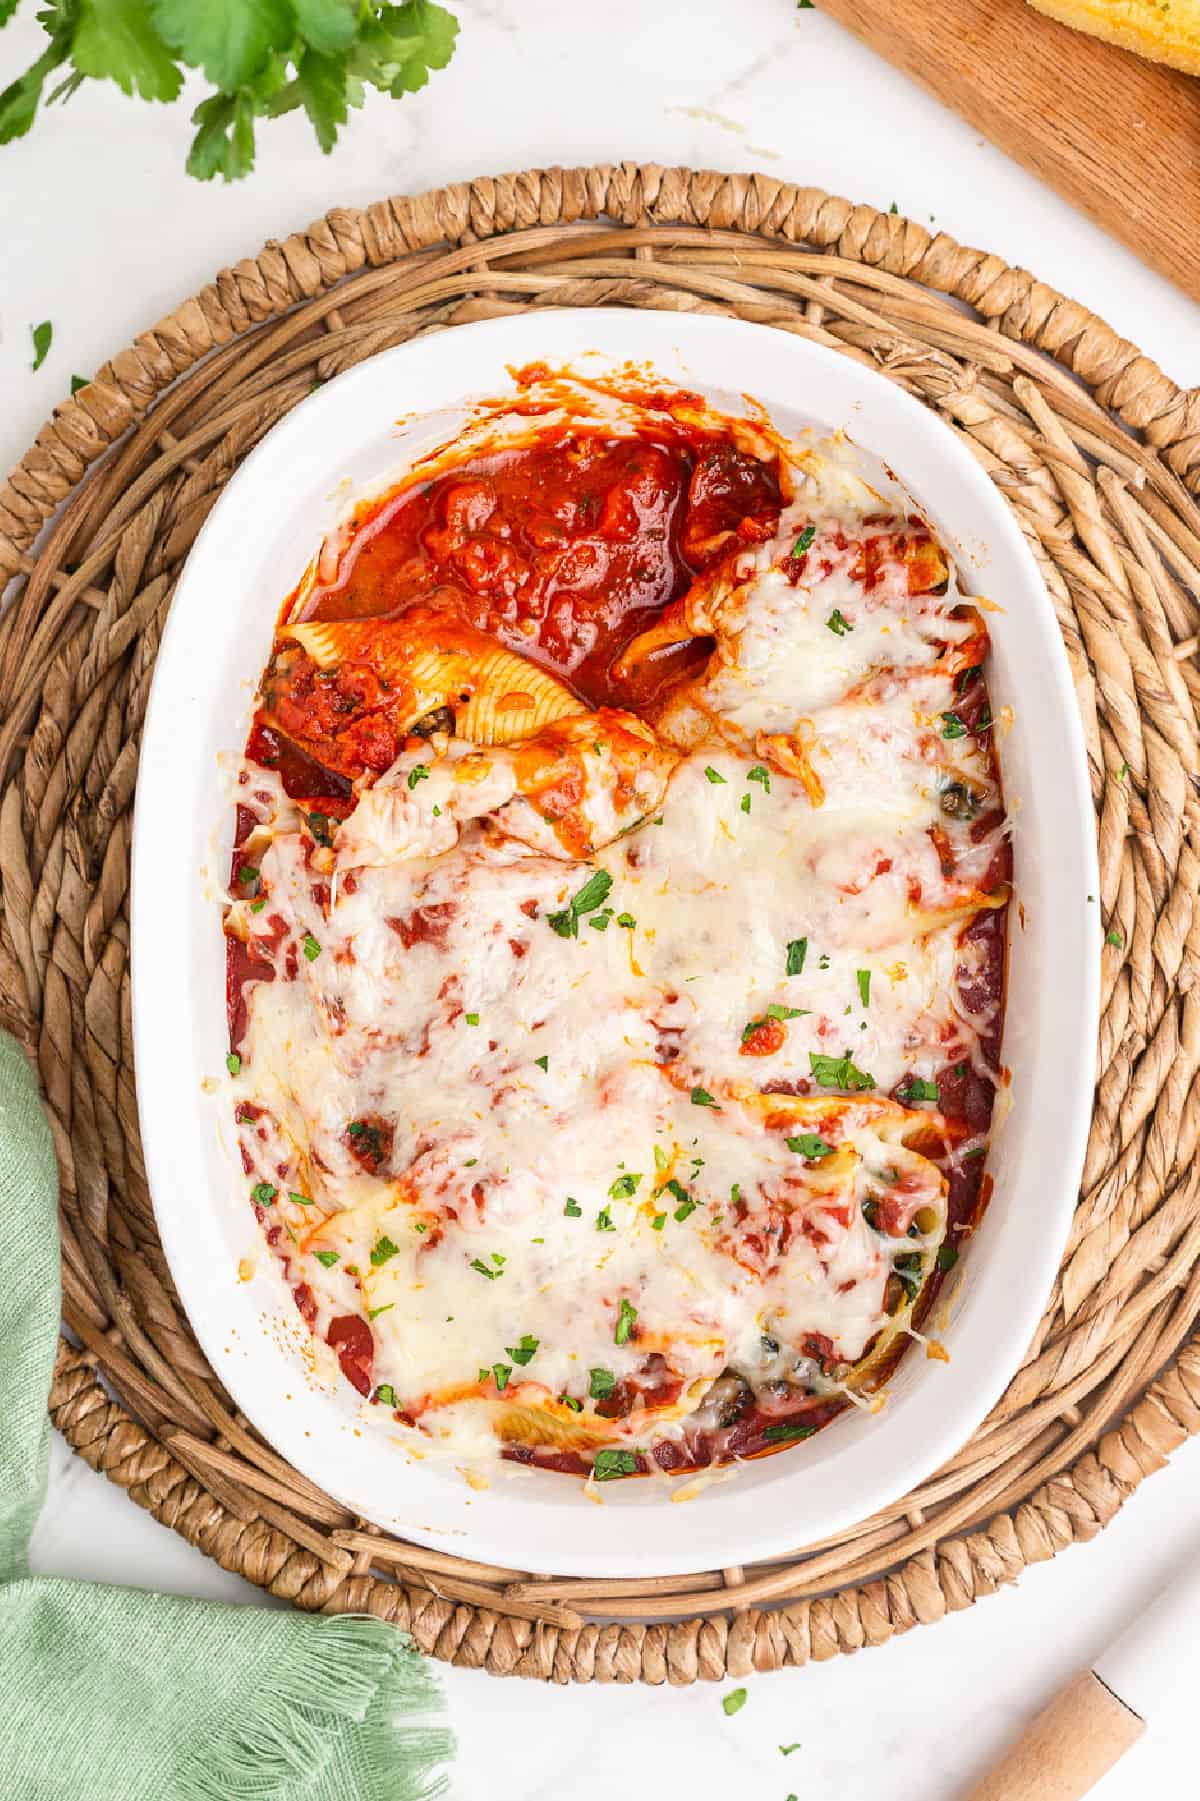 Sausage stuffed shells in casserole dish with melted cheese.